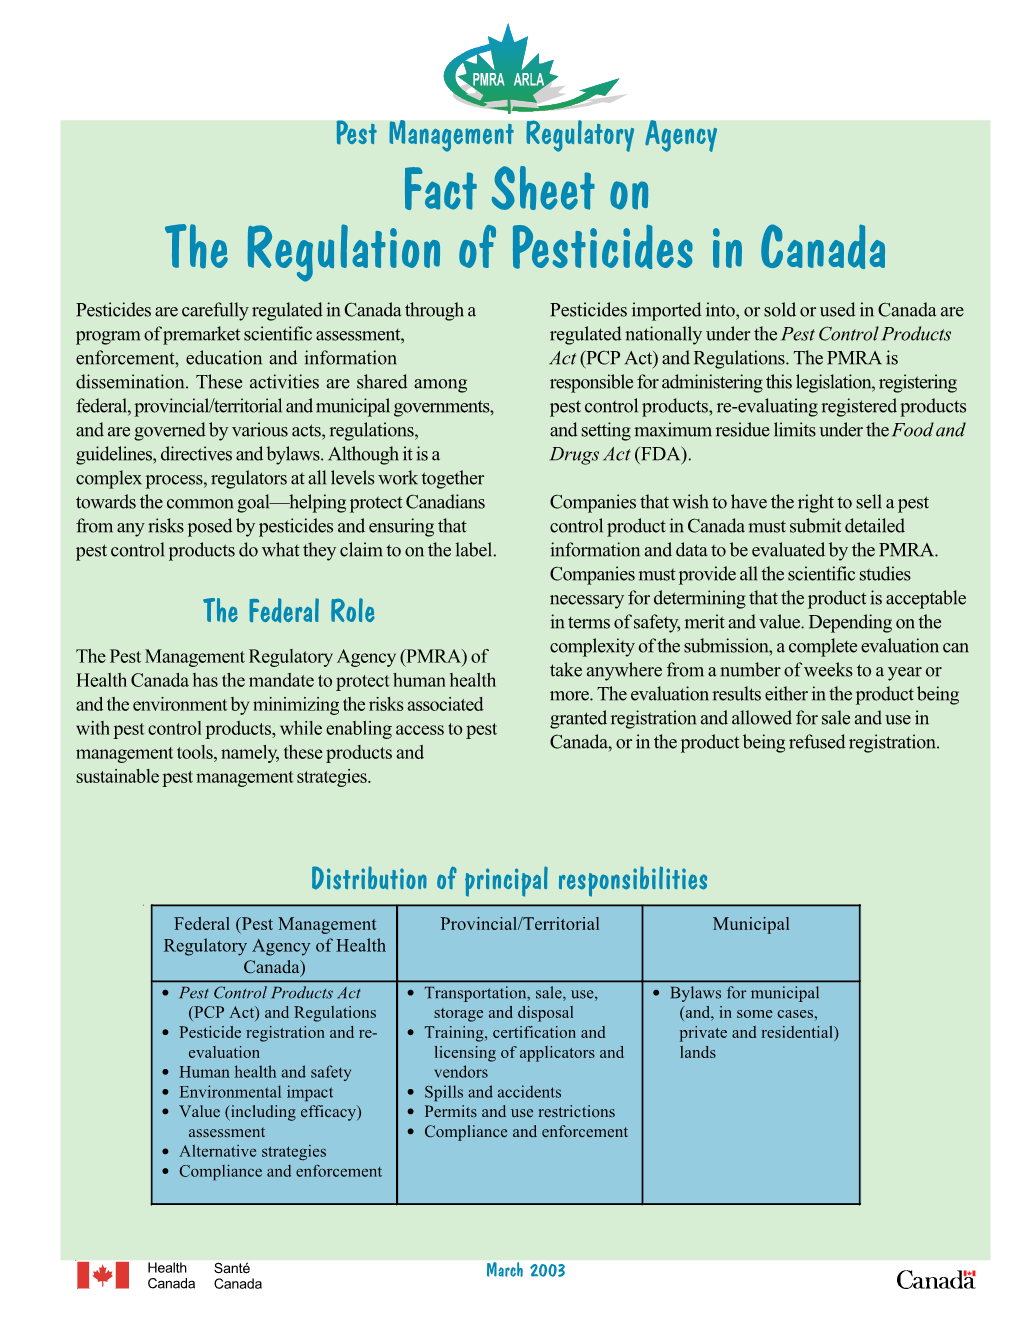 The Regulation of Pesticides in Canada